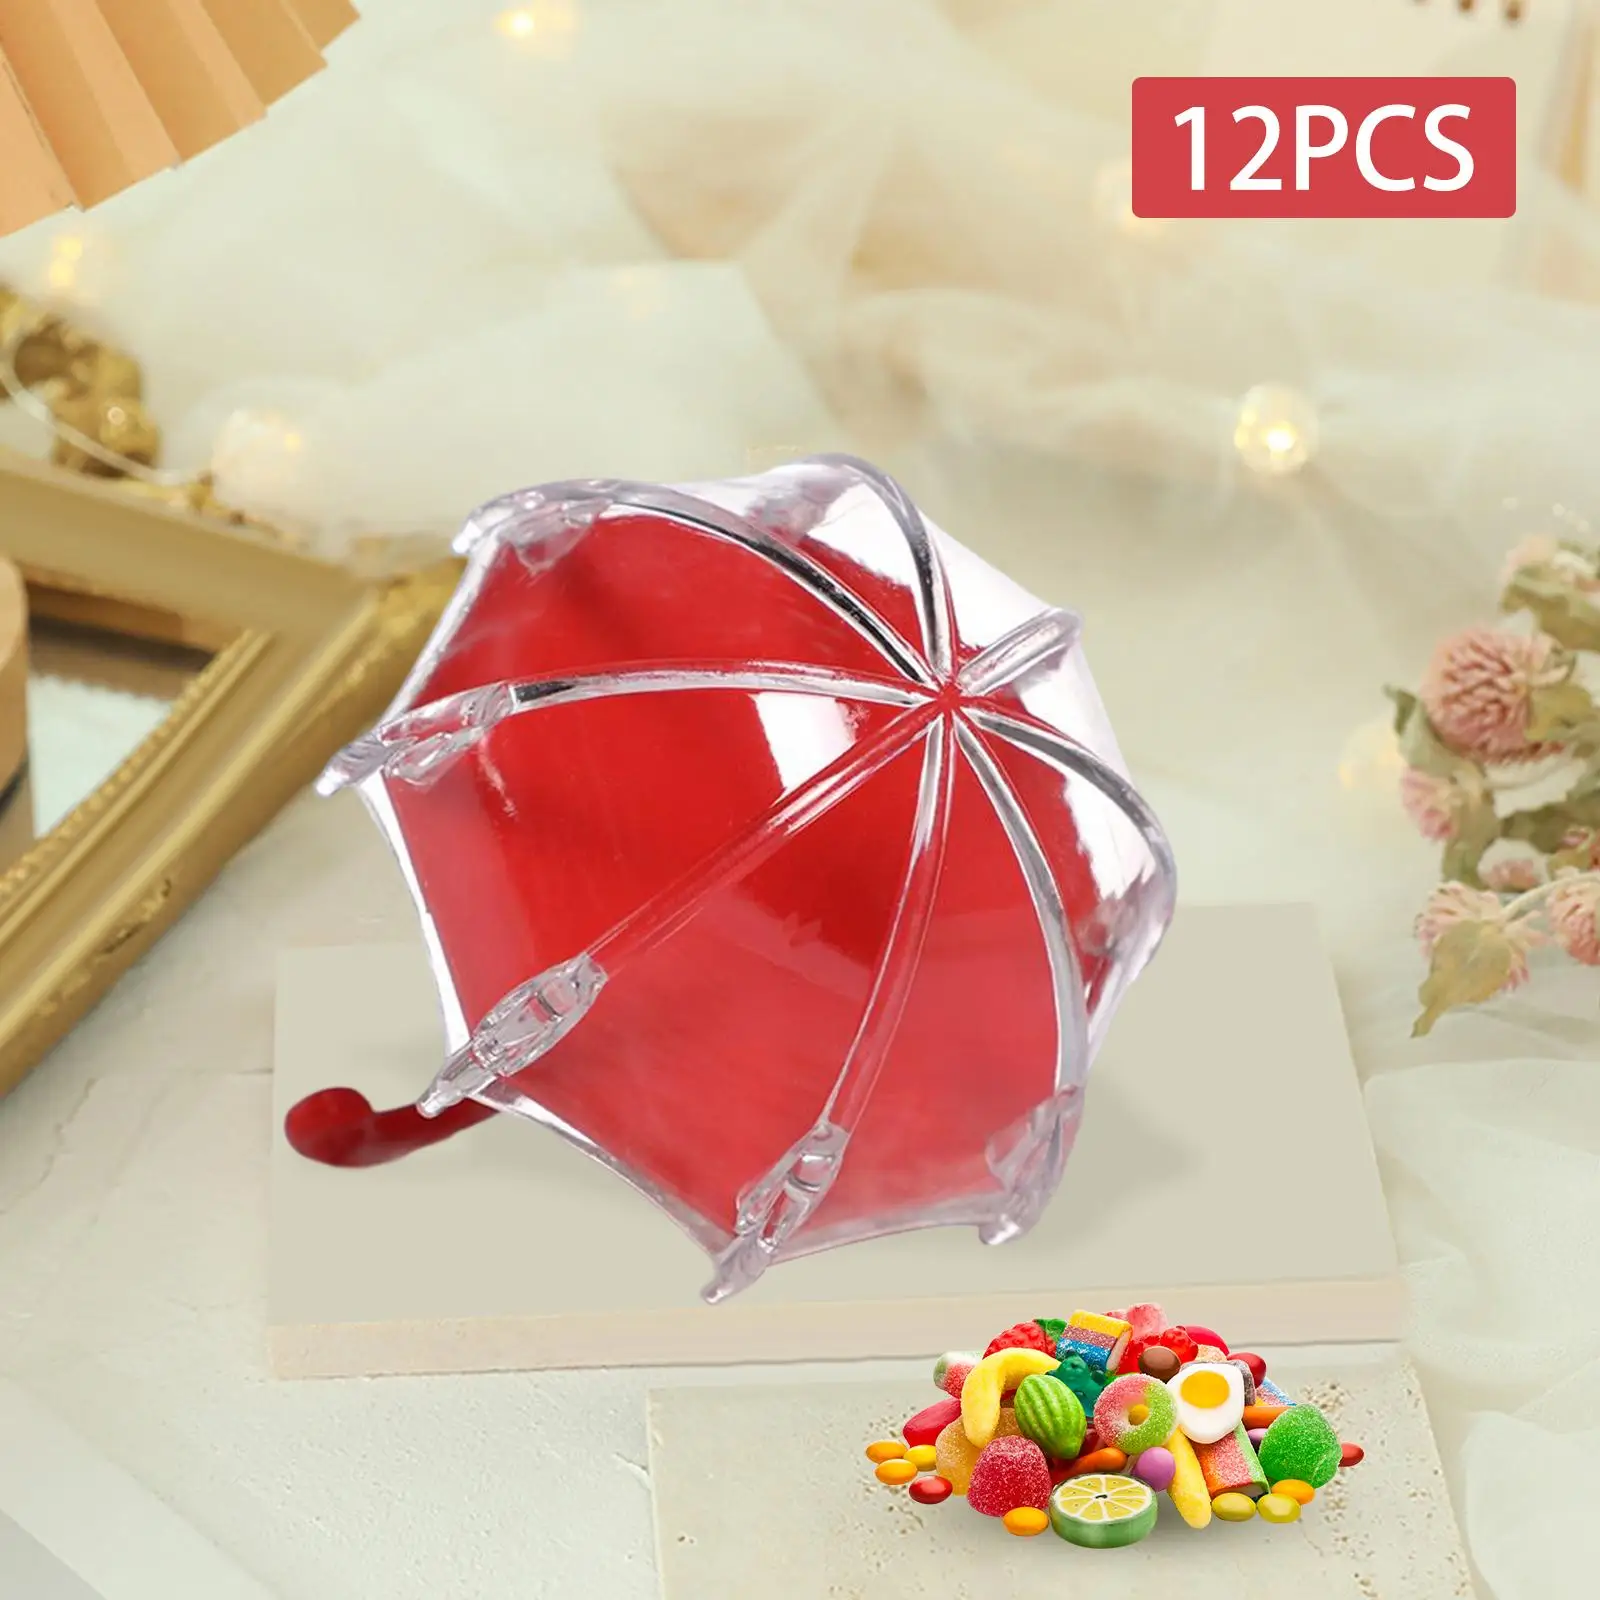 12pcs Mini Umbrella Shape Candy Boxes Clear Gifts Boxes Birthday Party Favors Wedding Engagement Children`s Day Decoration